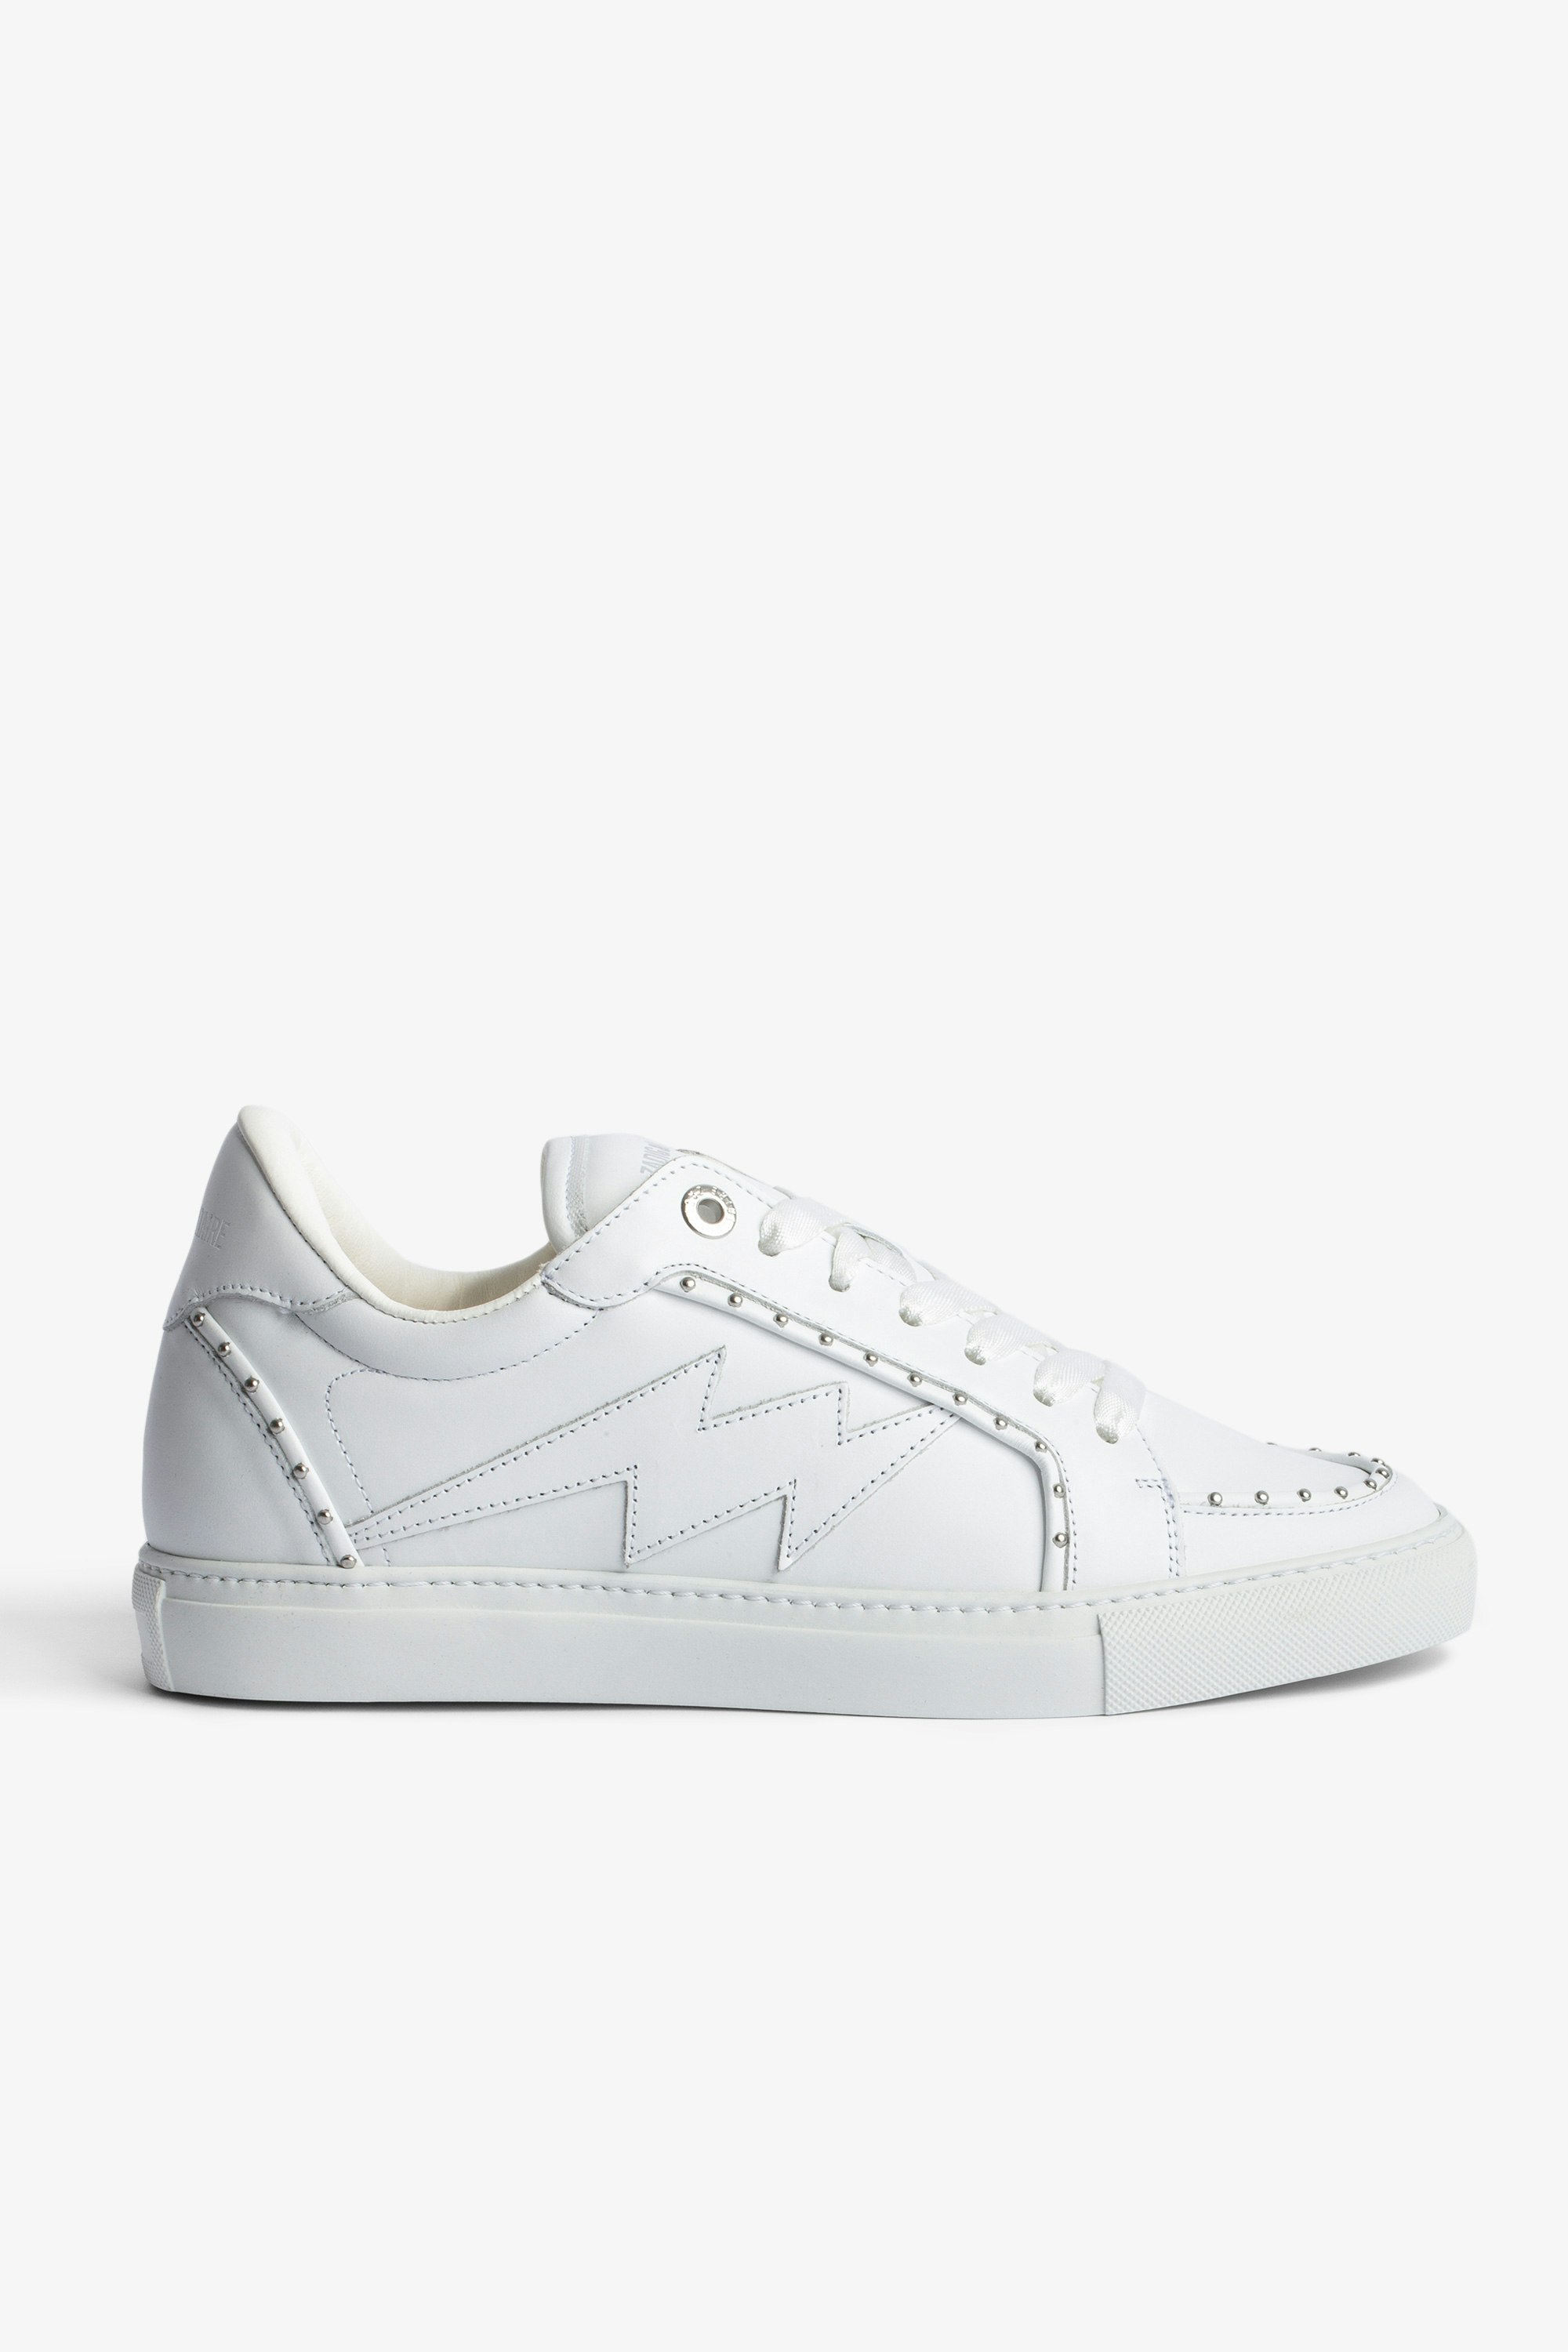 ZV1747 Studded Sneakers Women's low-top sneakers in smooth white leather with silver-tone studs